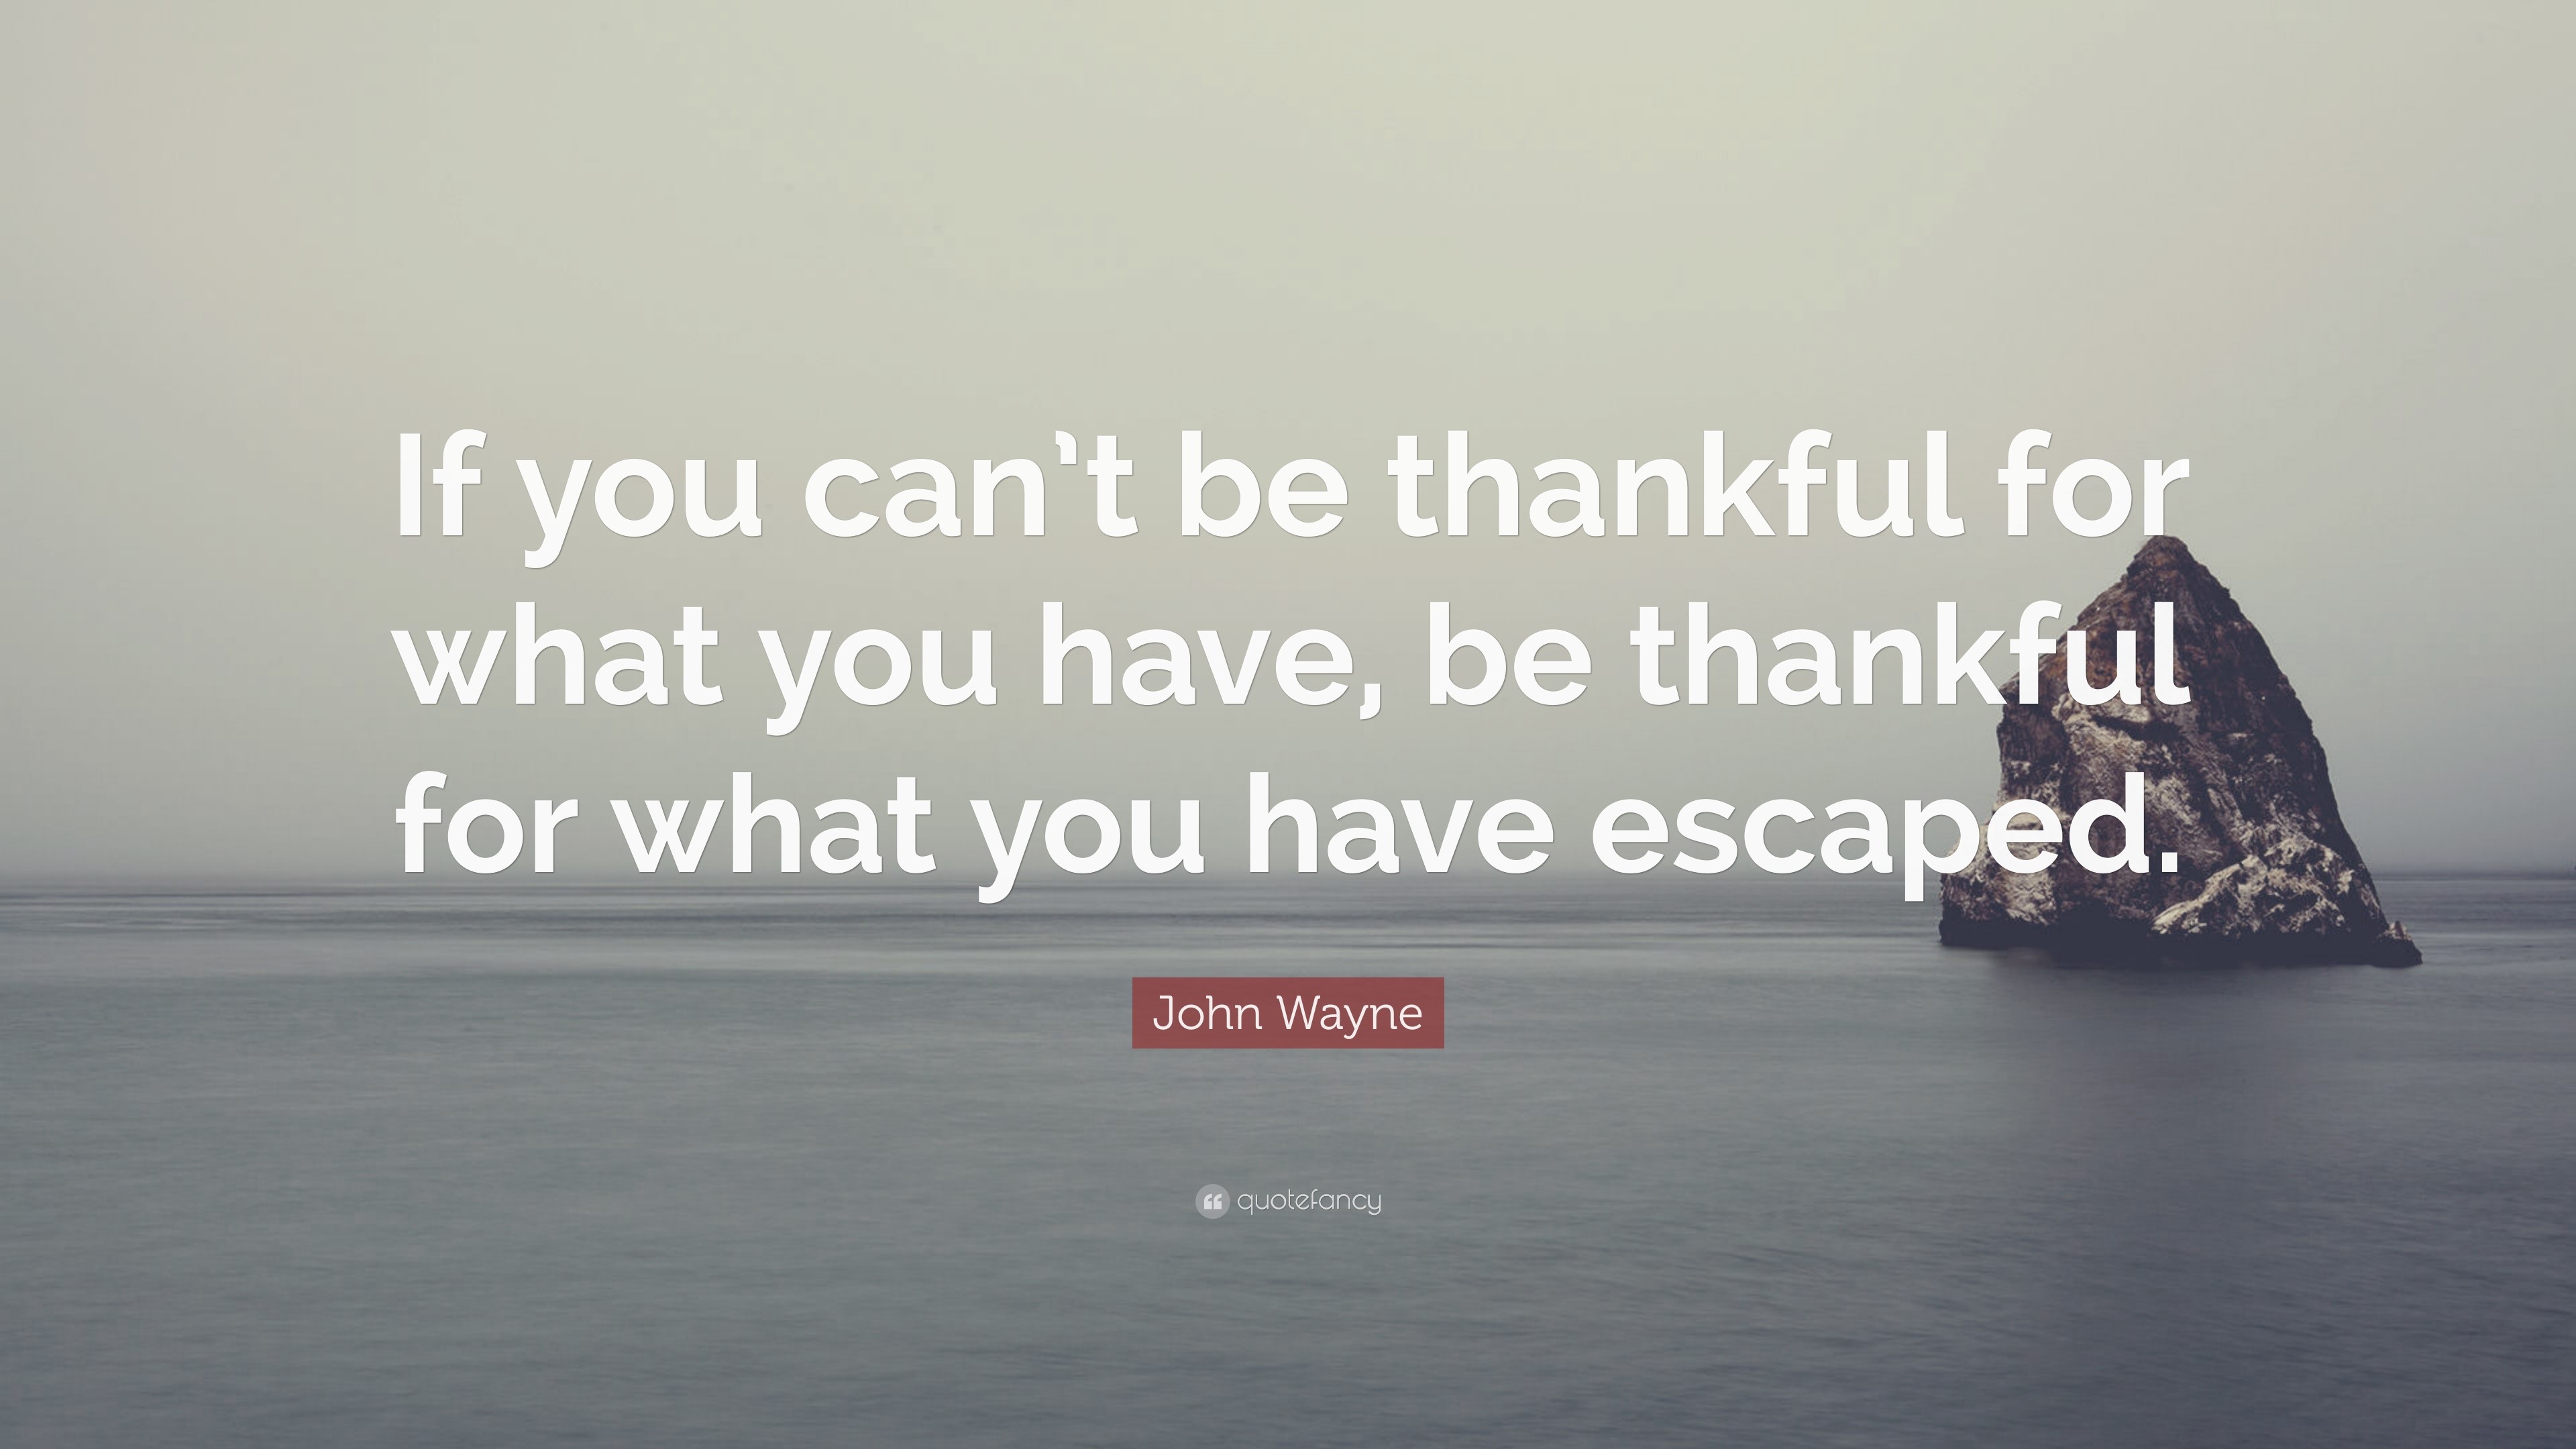 John Wayne Quote: “If you can’t be thankful for what you have, be ...